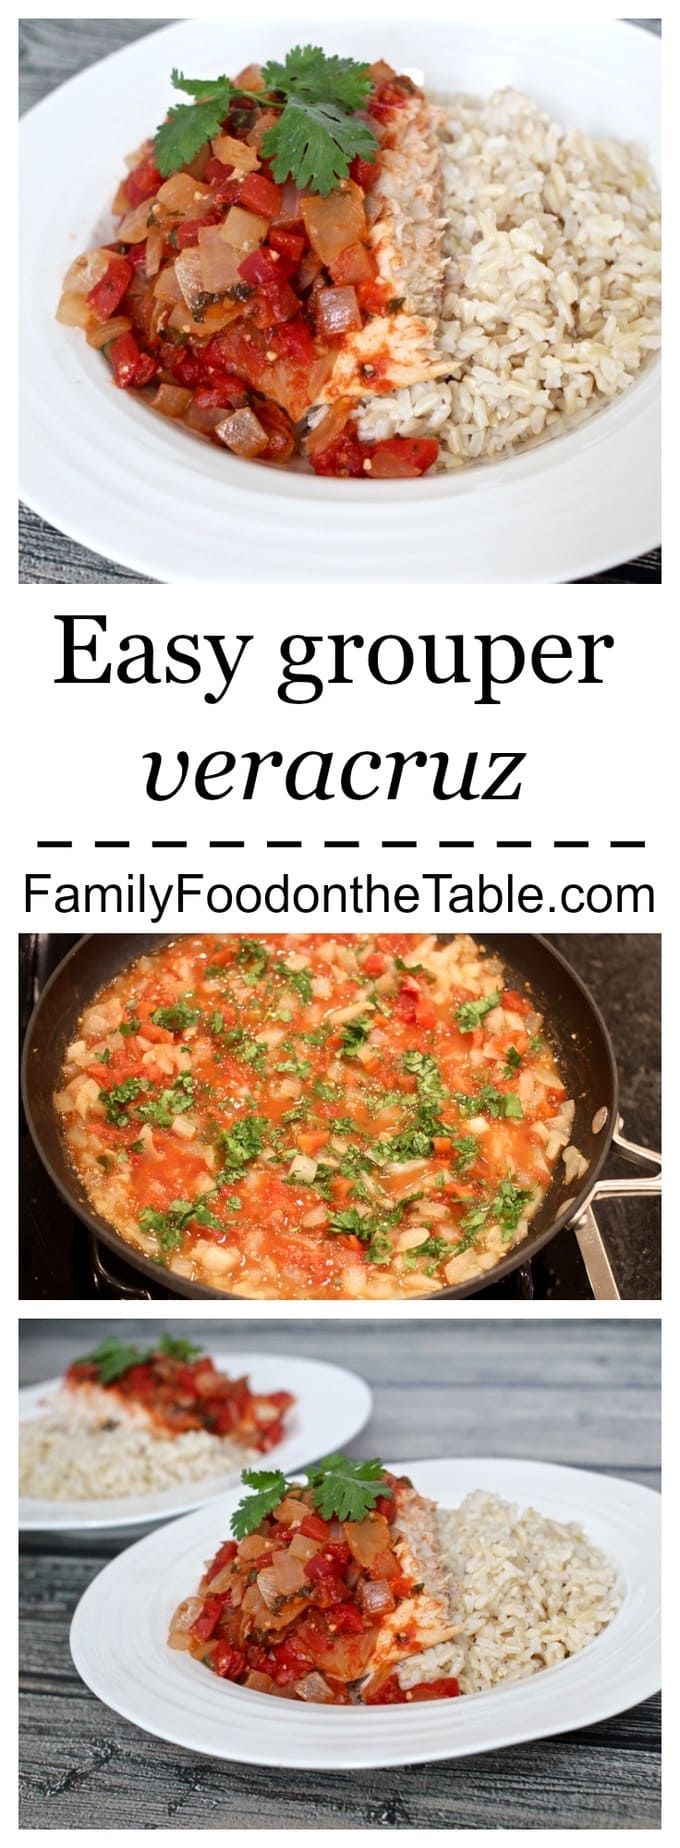 Grouper veracruz is an easy but impressive dinner of tender fish with a bright, delicious sauce!